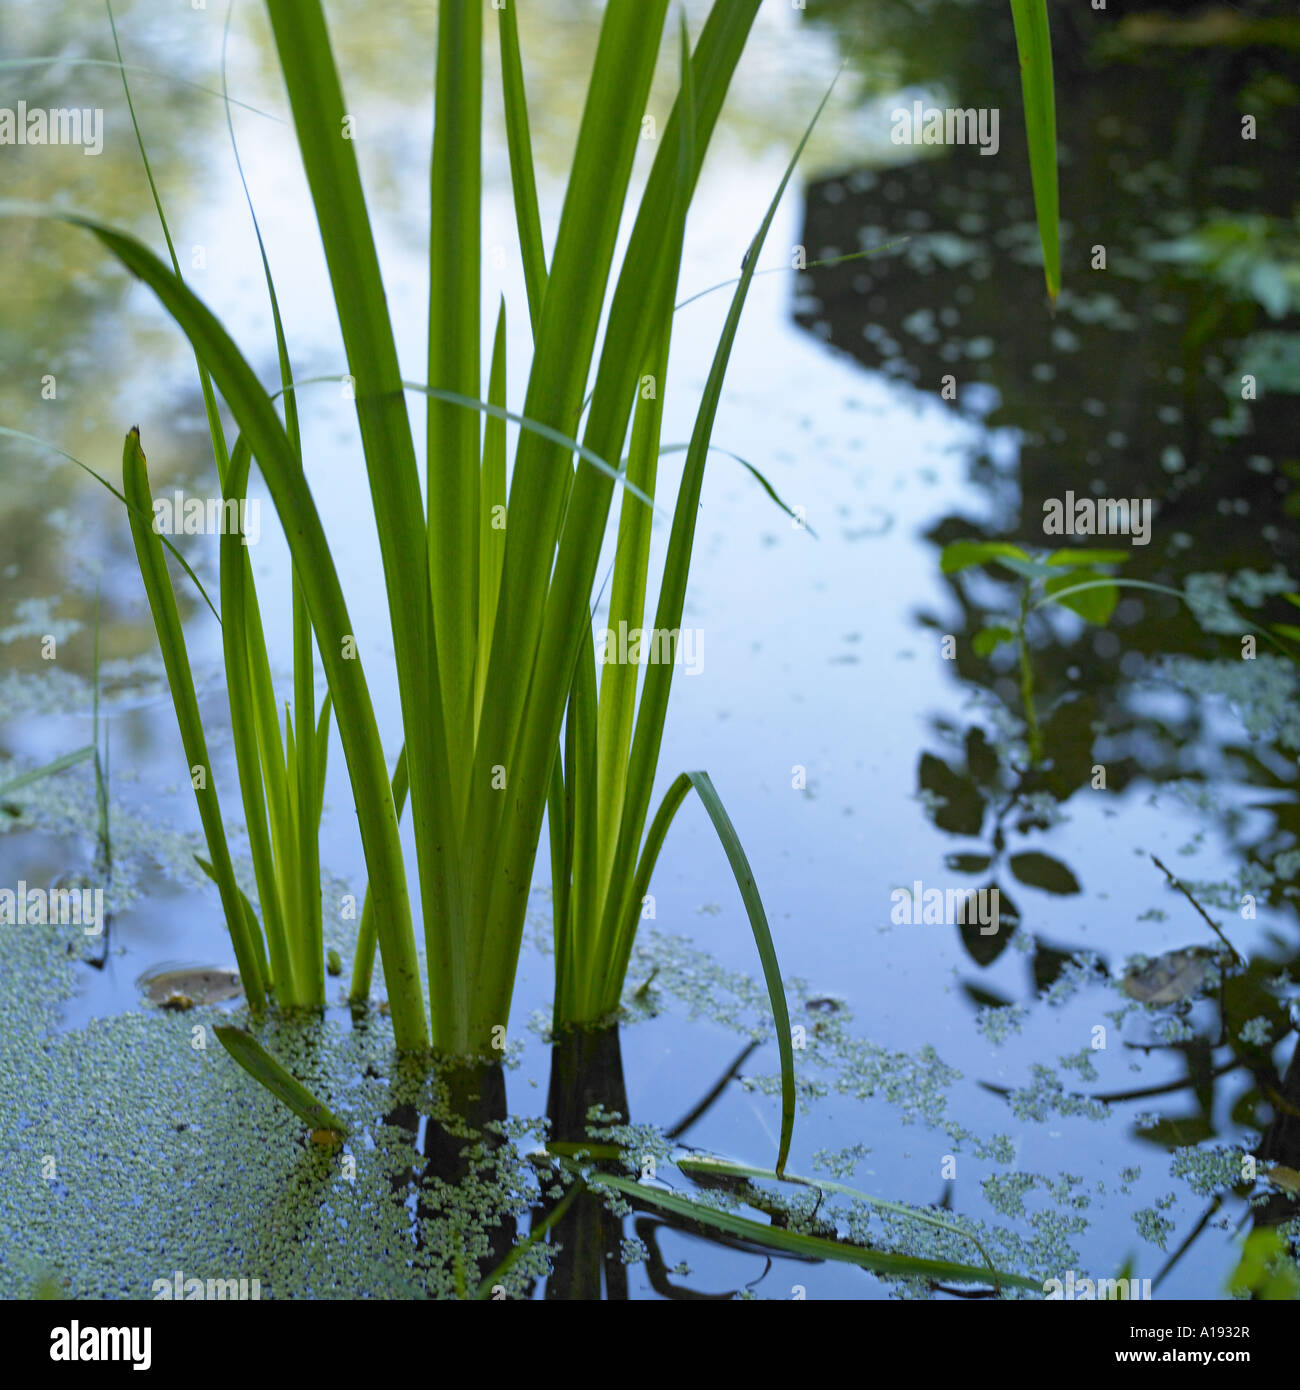 Patch of grass in water Stock Photo